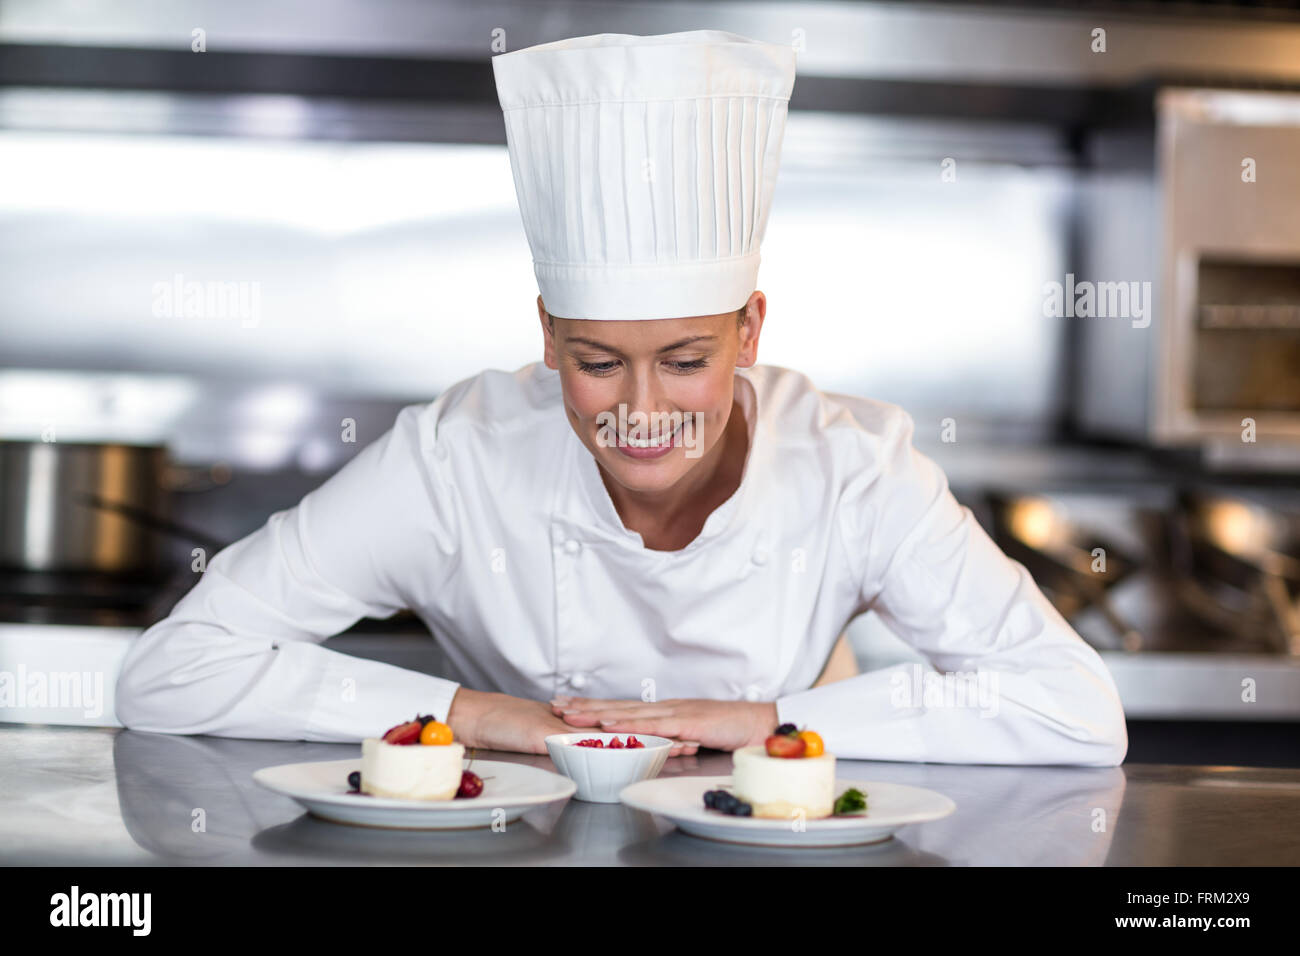 Female chef looking at food plates in kitchen Stock Photo